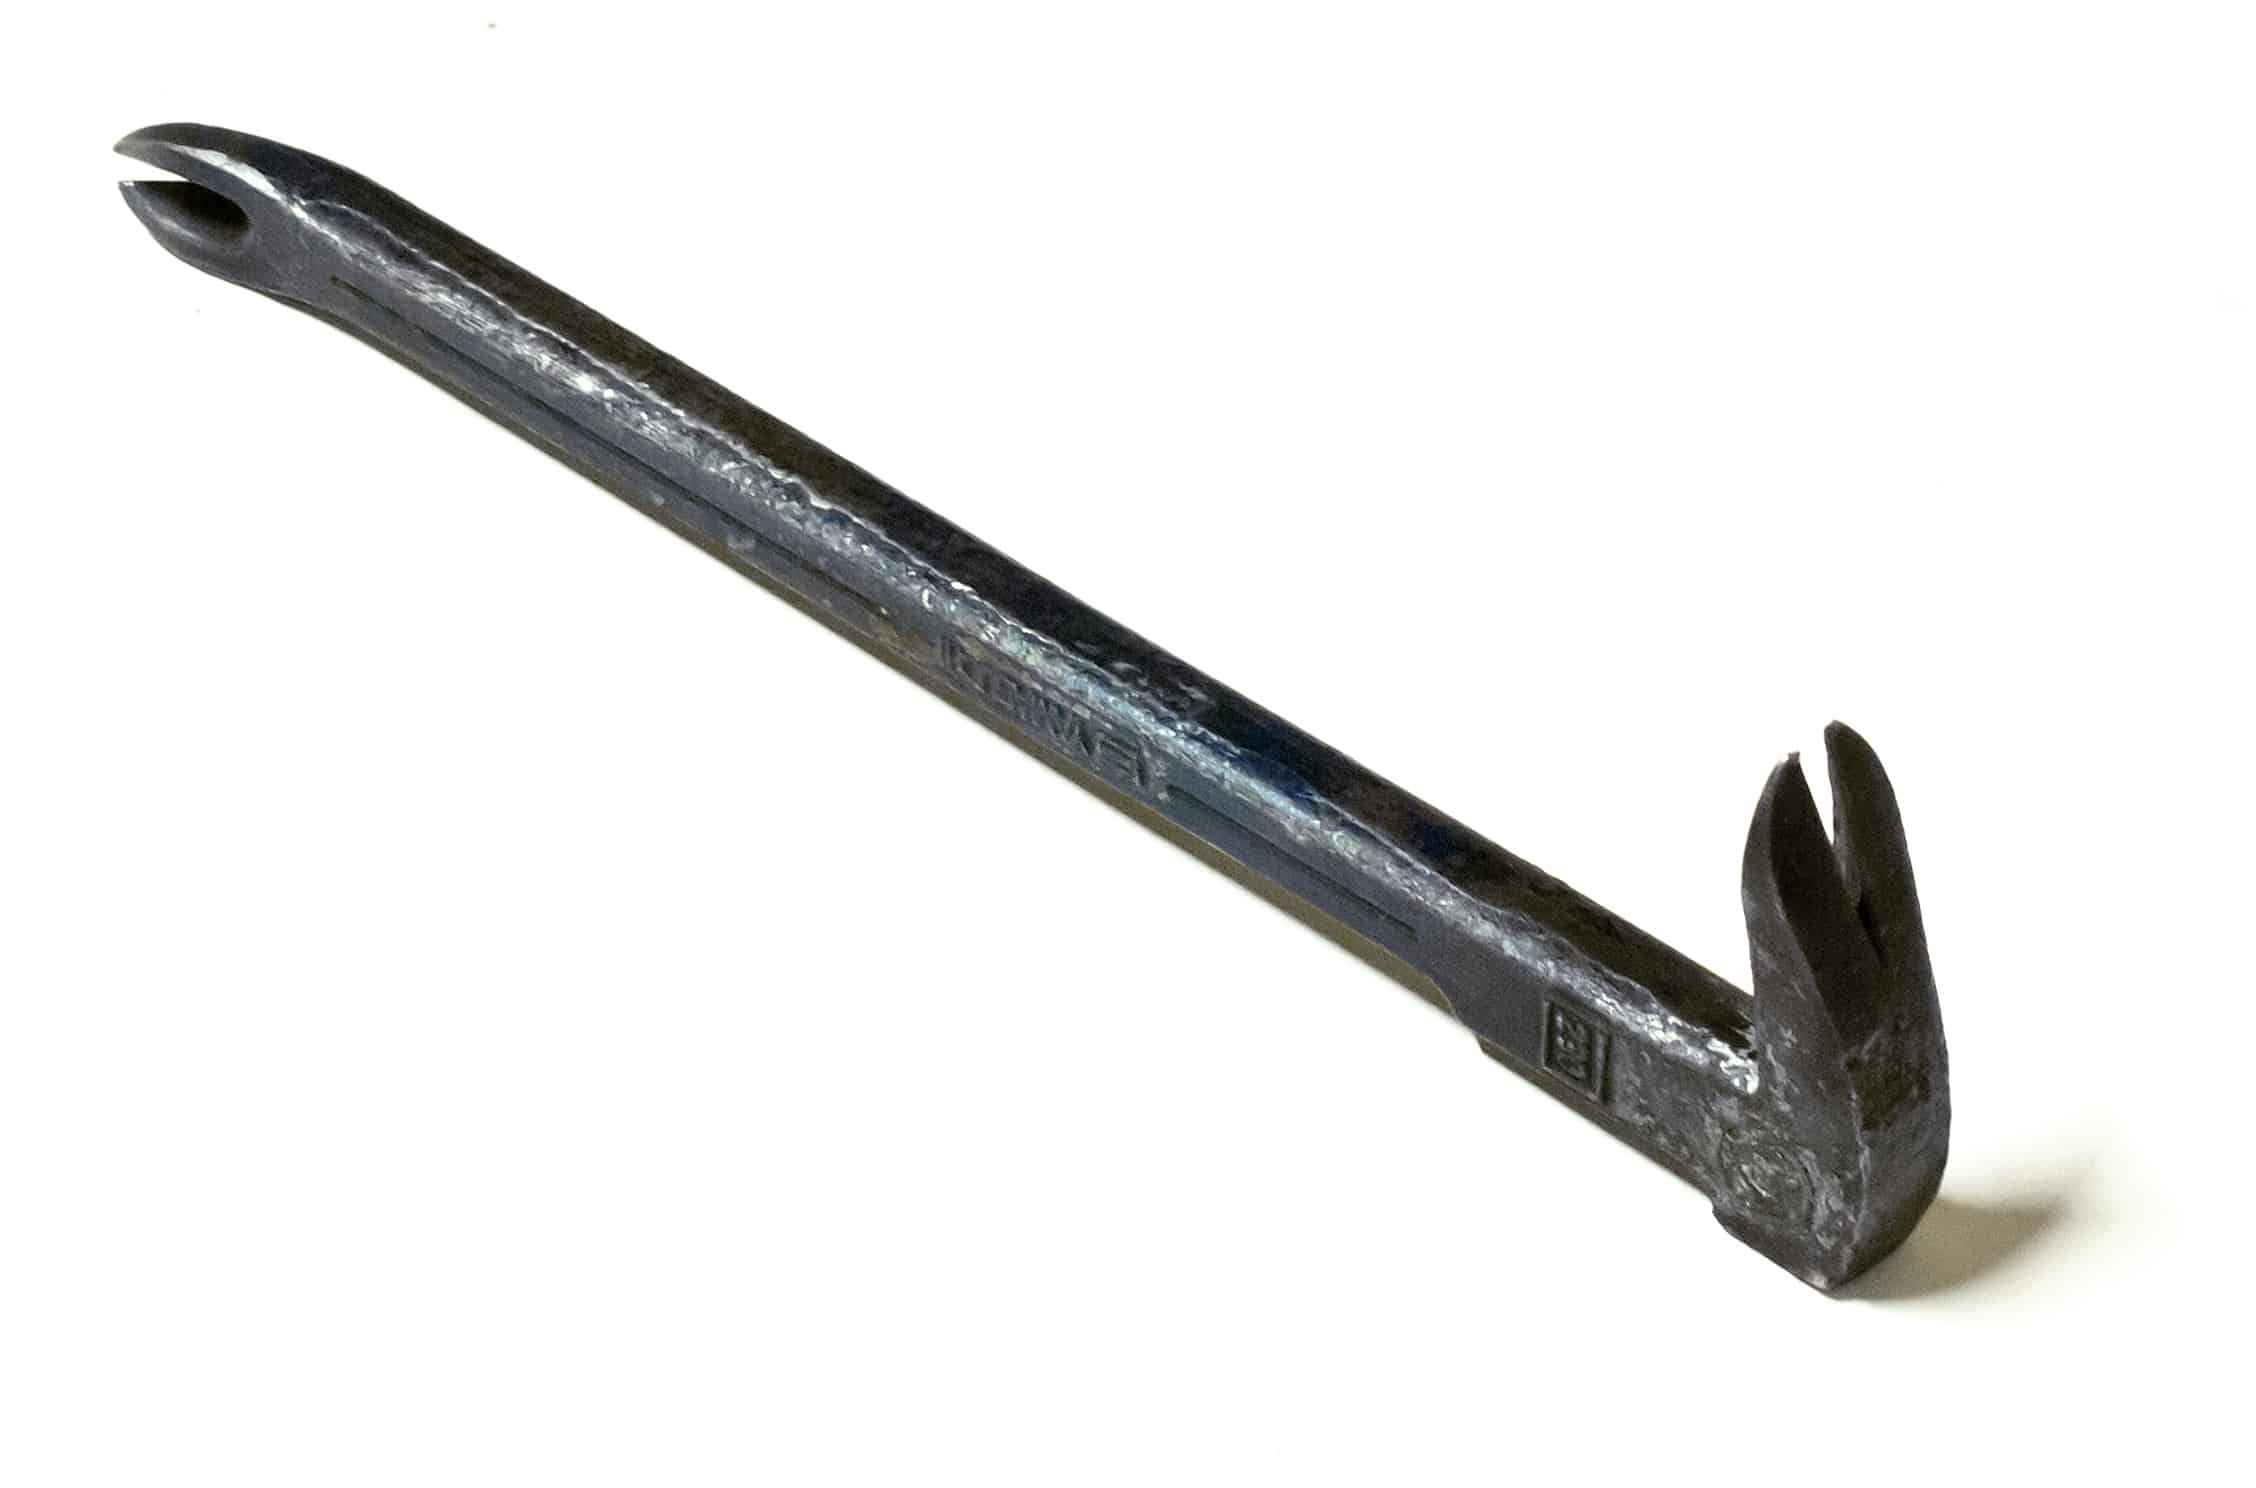 nail puller tool to remove nail from wood